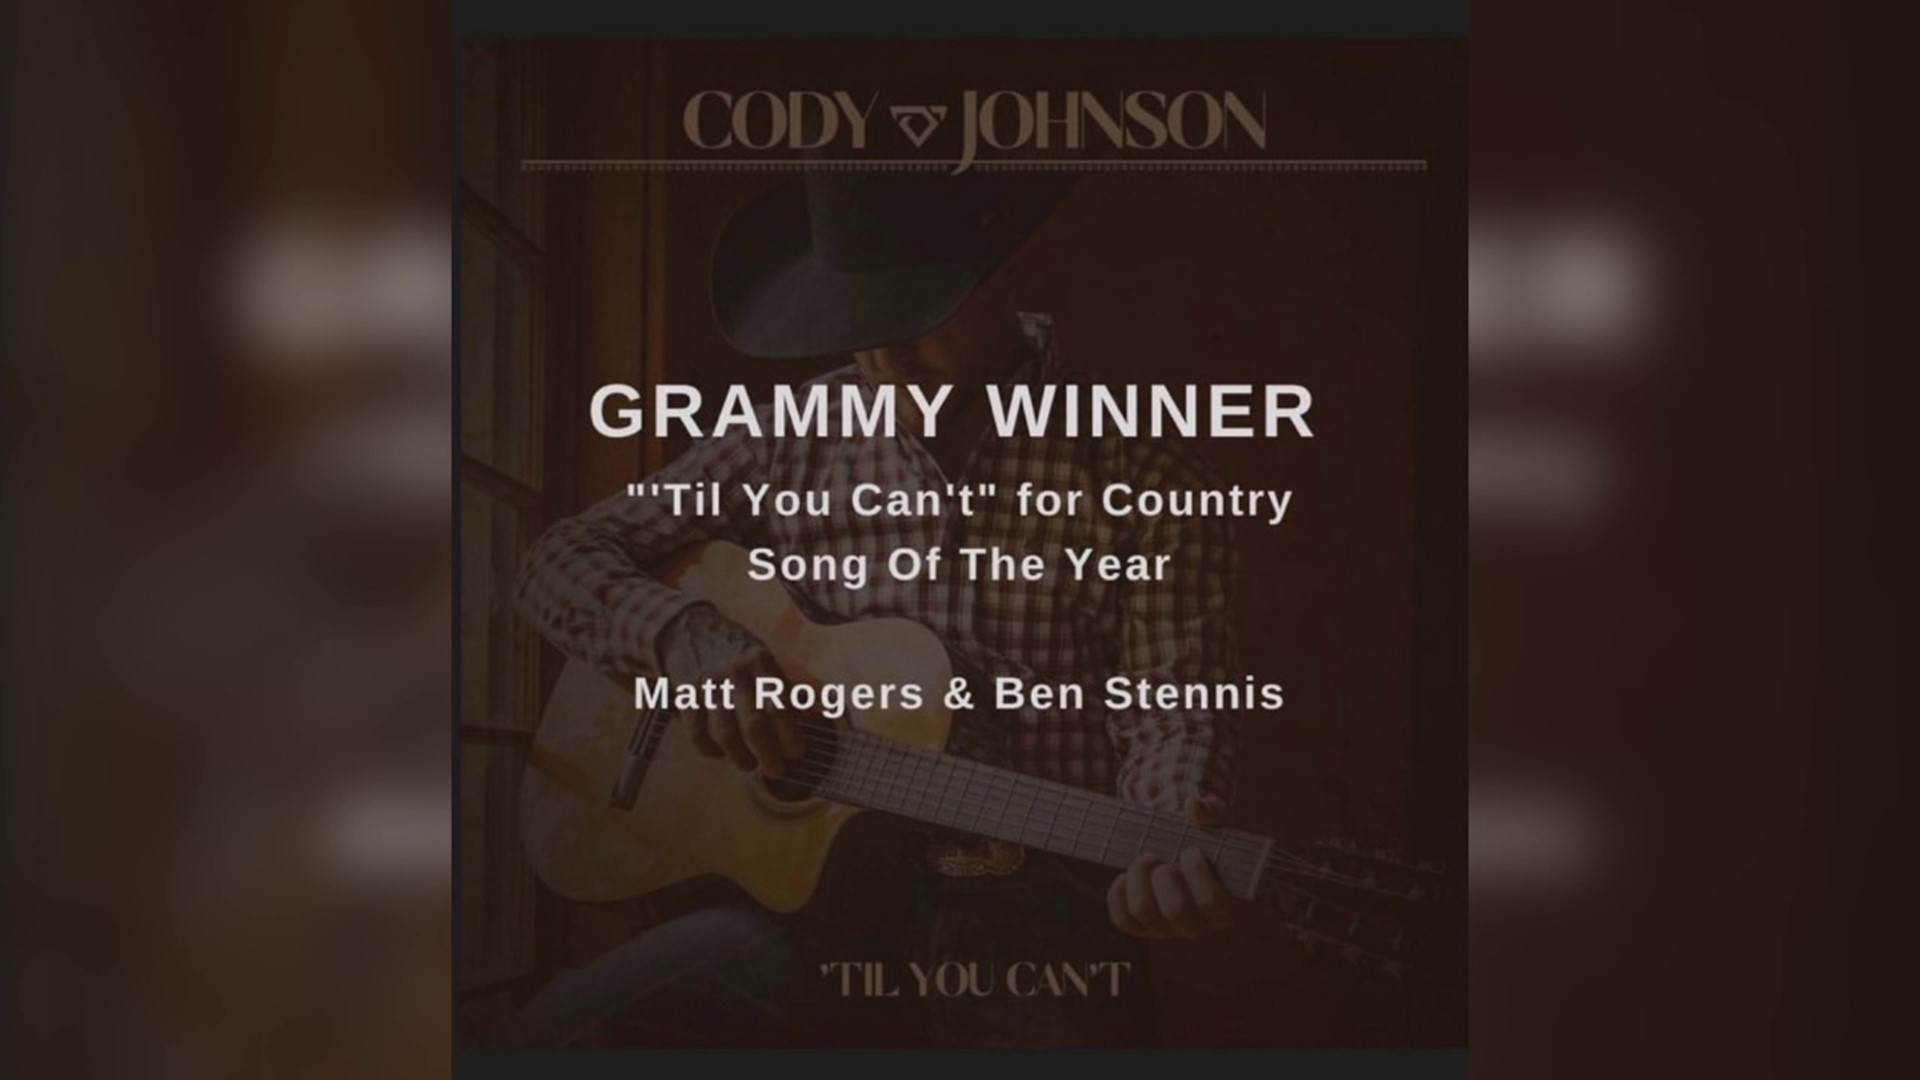 Wyoming Valley West graduate Matt Rogers co-wrote Cody Johnson's song ''Til You Can't" which won 'Country Song of the Year' at the ceremony in Los Angeles Sunday.